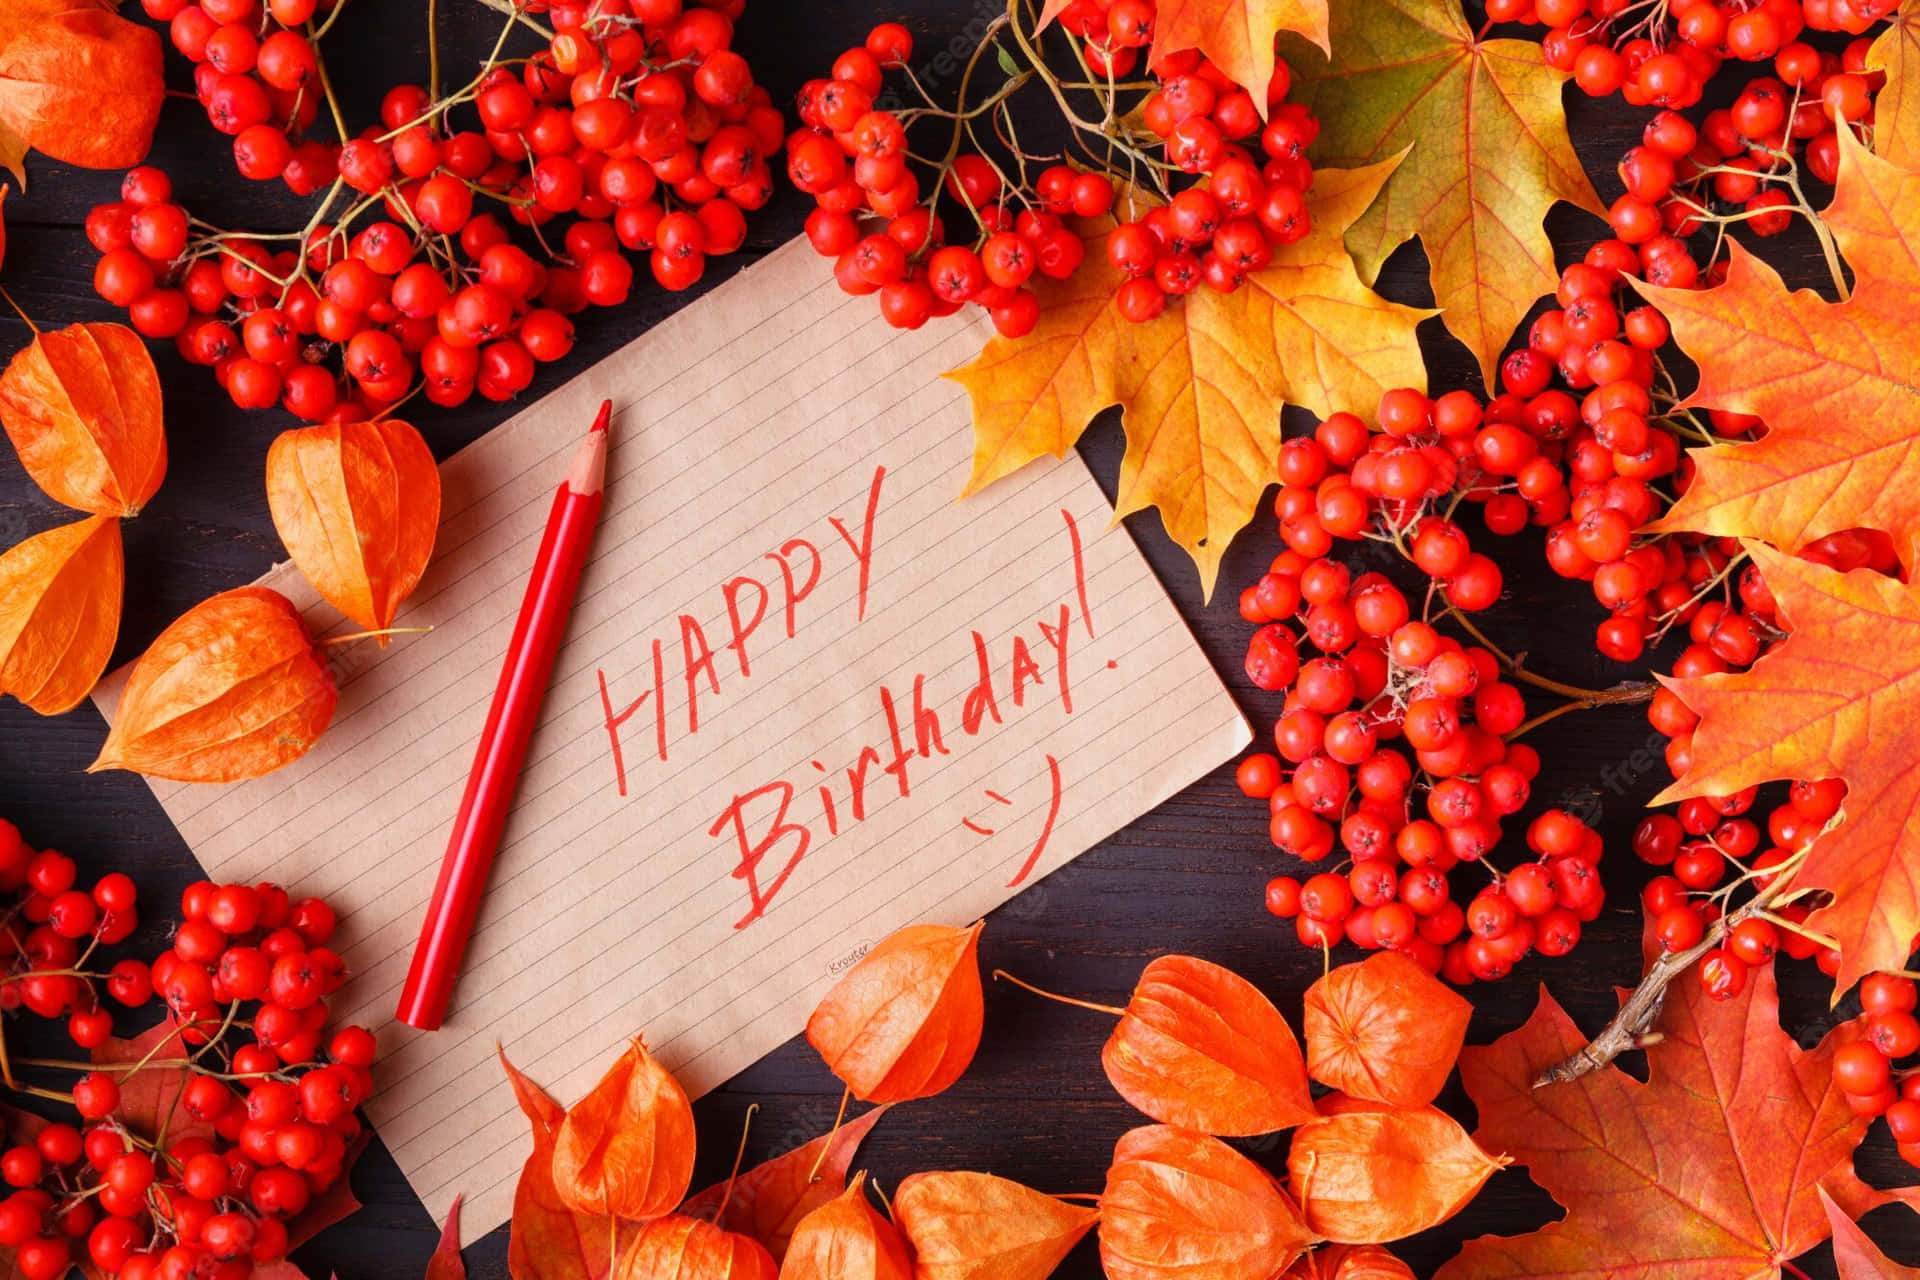 Happy Birthday Card With Red Berries And A Red Pen Wallpaper